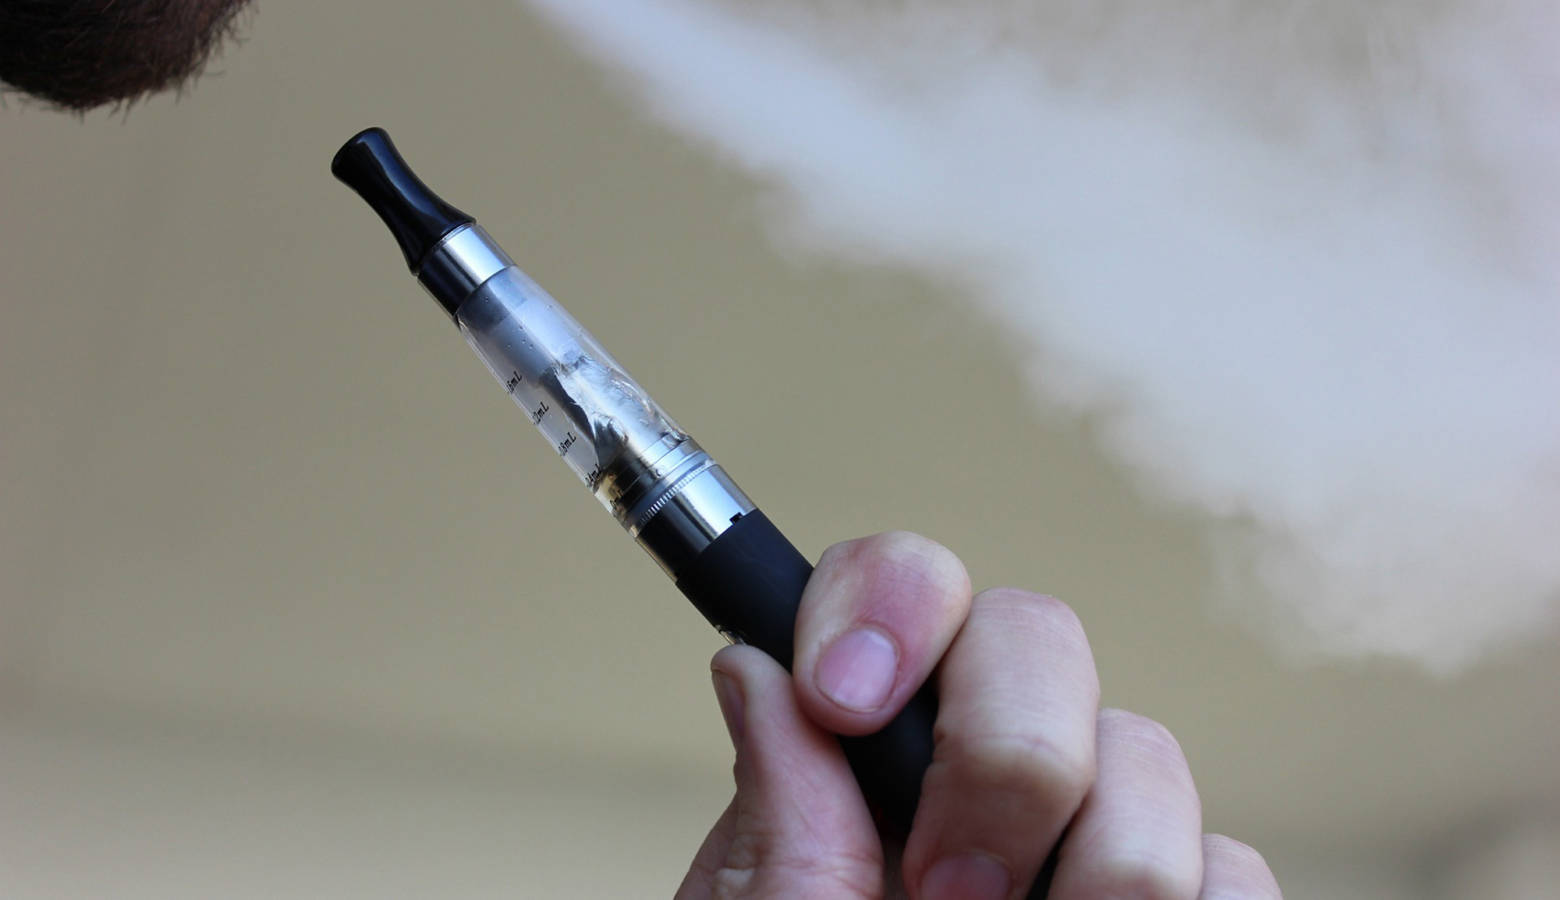 The CDC says vitamin E acetate is the primary culprit behind a rash of lung injuries that have caused vaping deaths around the country. (Pixabay)